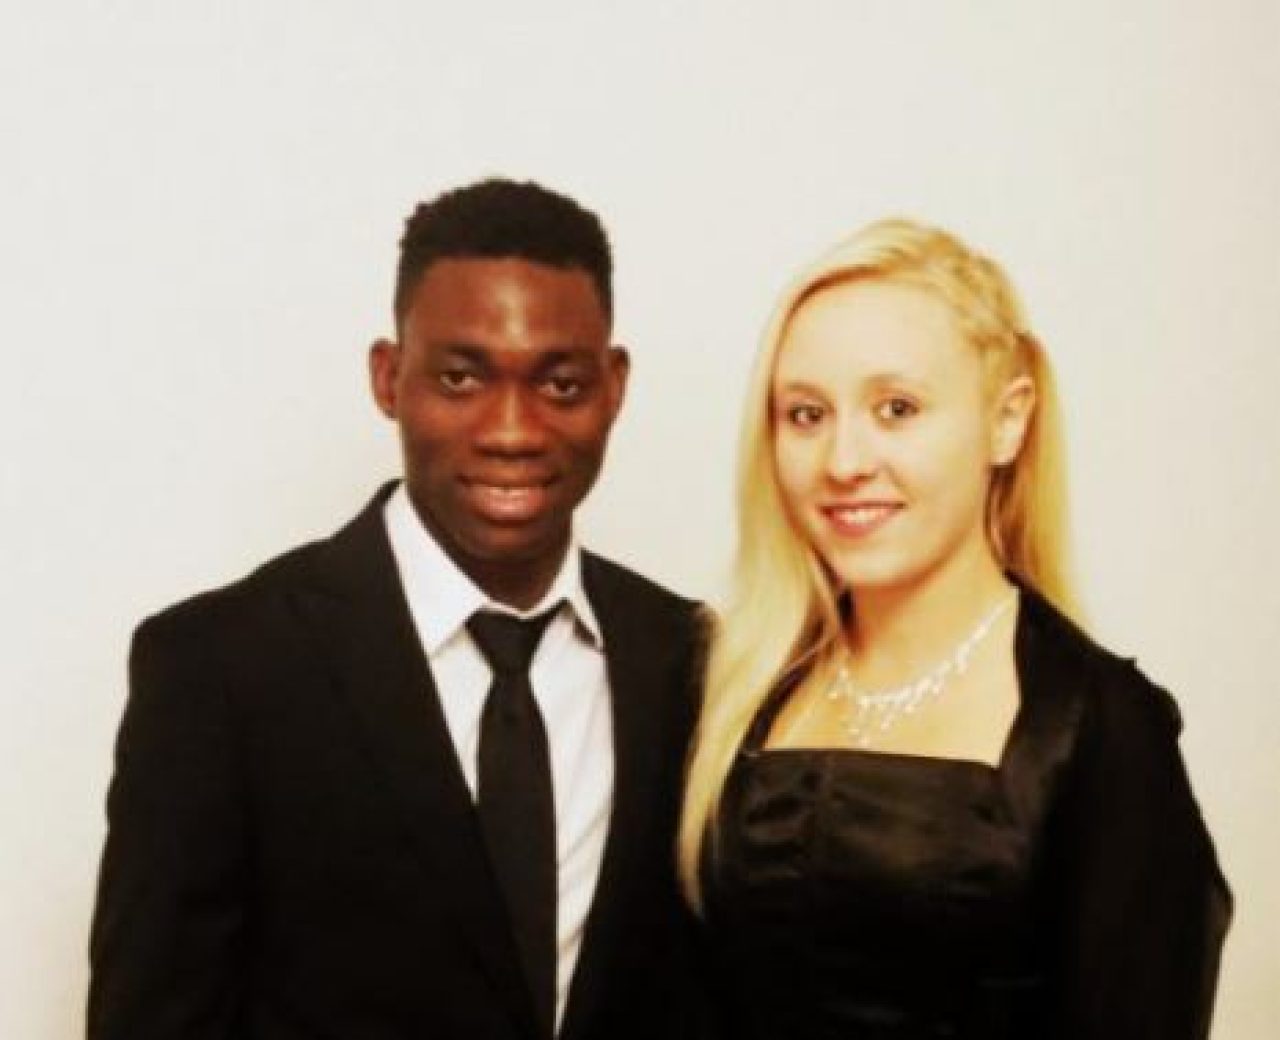 According to reports, Christian Atsu was battling divorce before his death. Afro News Wire